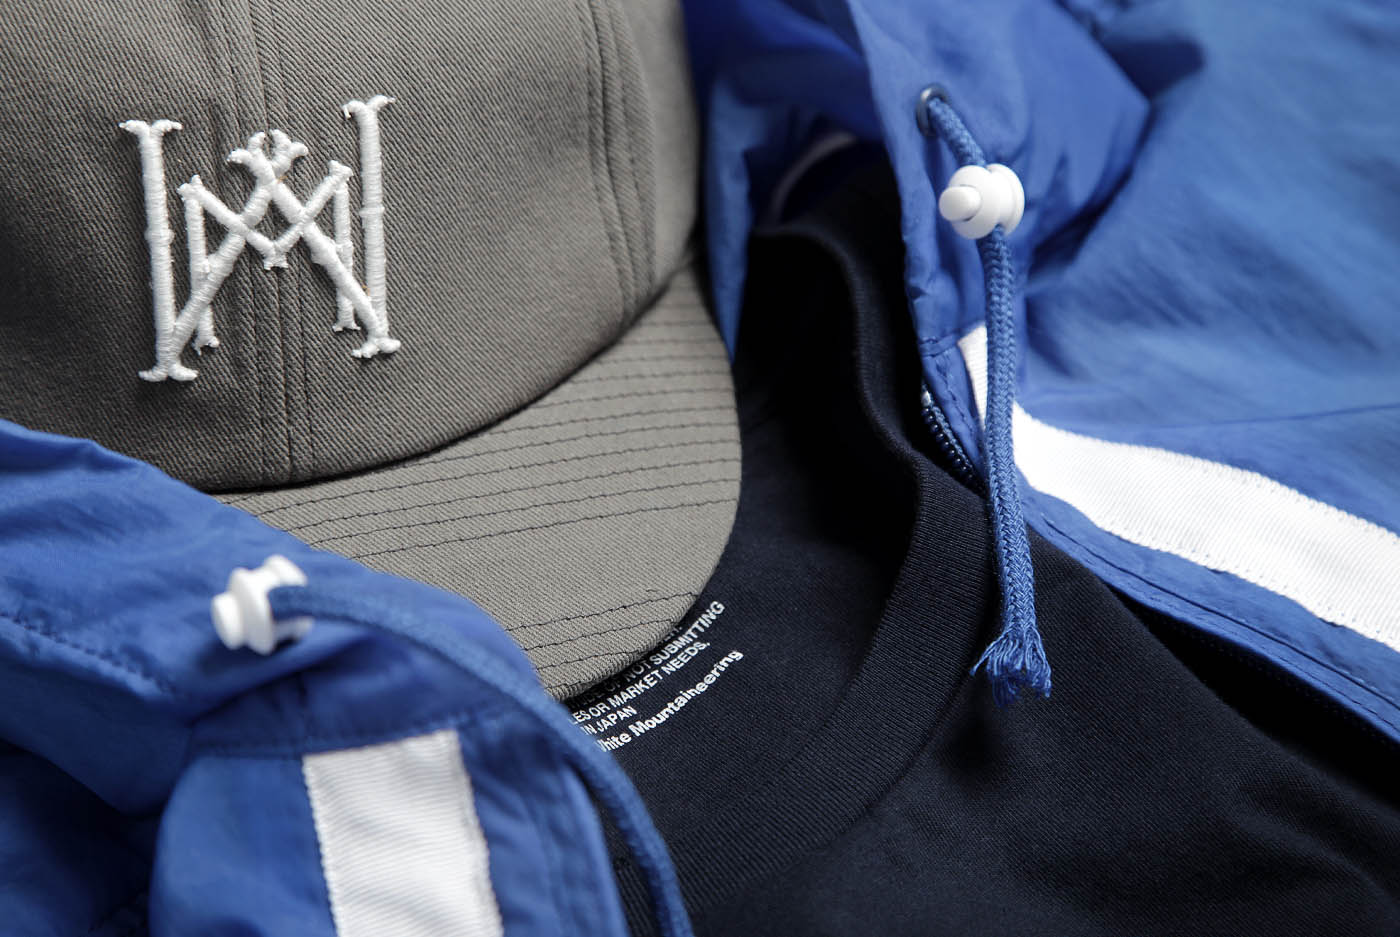 White Mountaineering SS13 collection